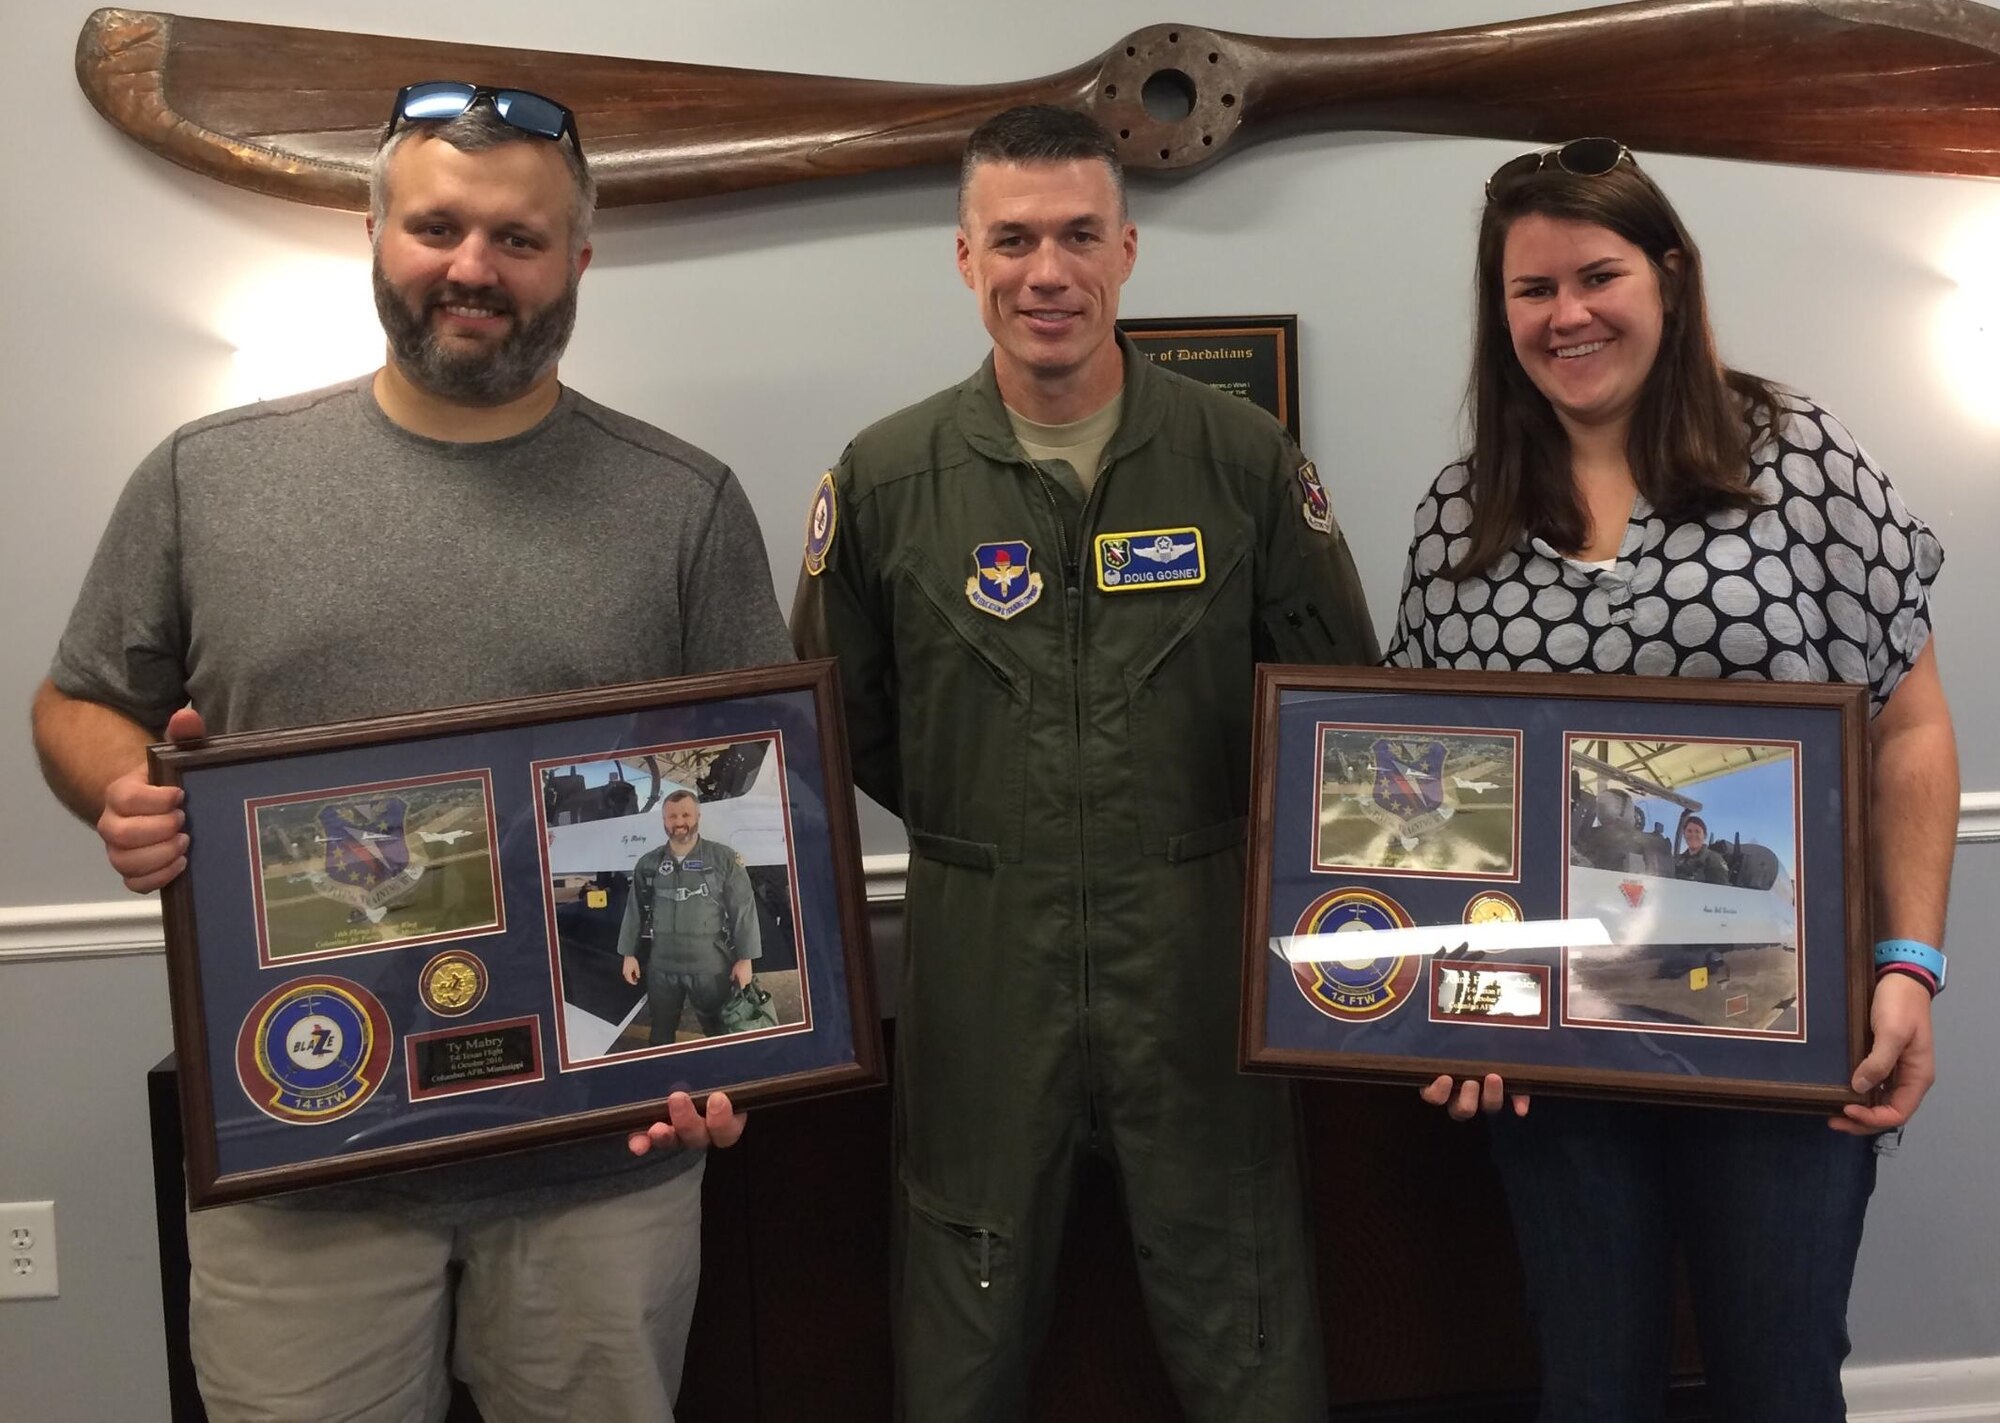 Ty Mabry and Anne Hall Brashier, Military Legislative Aides for Sen. Thad Cochran of Mississippi, pause for a photo with Col. Doug Gosney, 14th Flying Training Wing Commander, after their T-6 Texan II orientation flights Oct. 6 at Columbus Air Force Base, Mississippi. The staffers, who were able to experience Air Force aviation for the first time, called it “the highlight of the year.” (U.S. Air Force photo by Richard Johnson) 